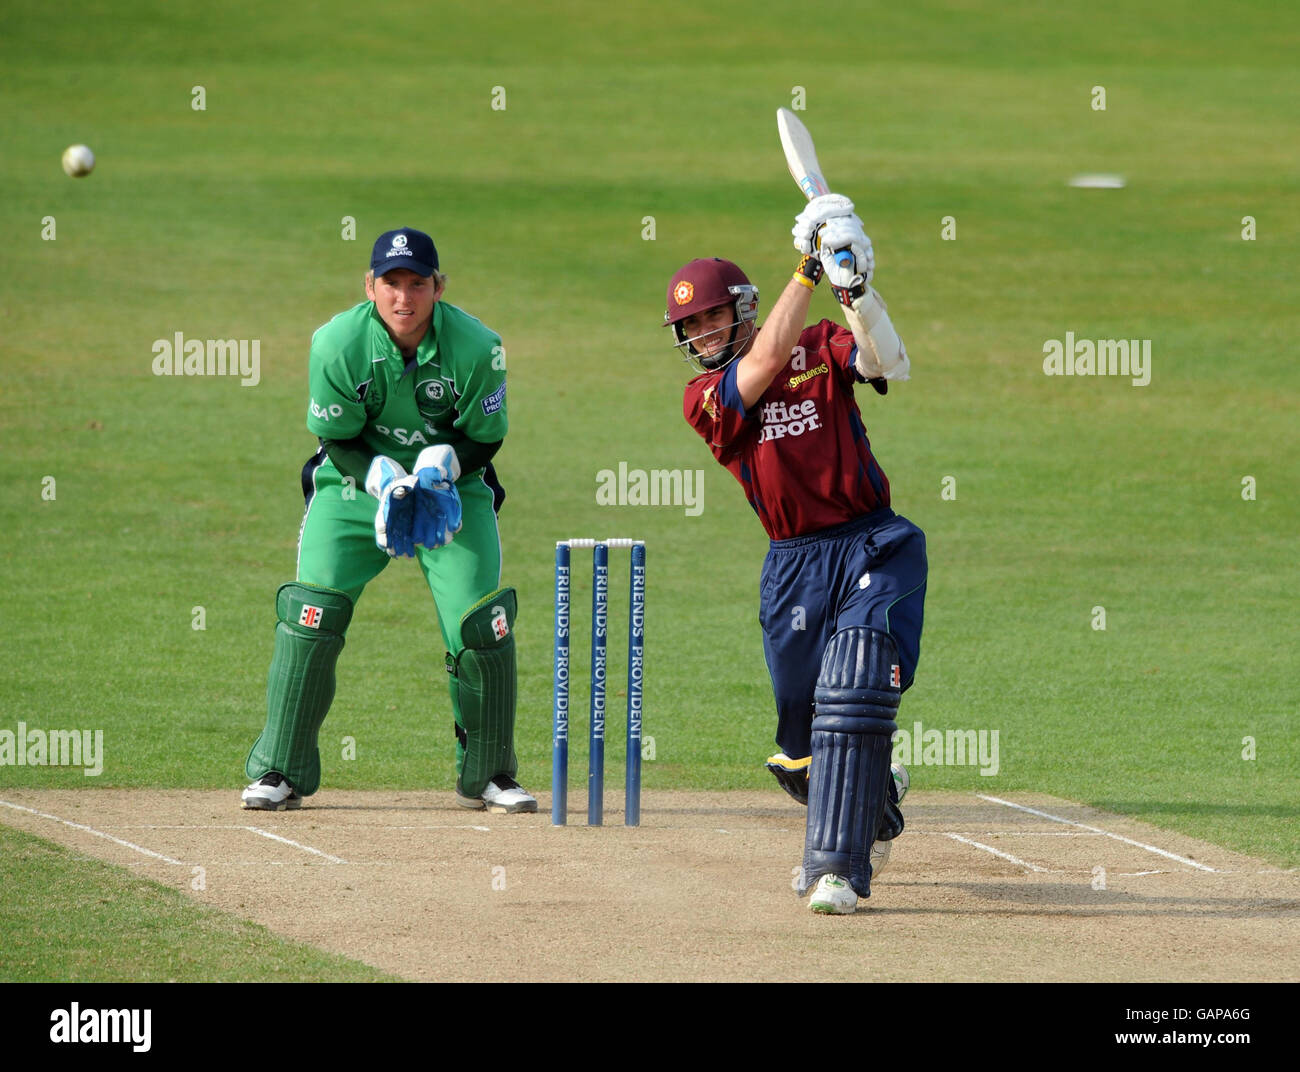 Northamptonshire's Stephen Peters hits out during the Friends Provident Trophy match at the County Ground, Northampton. Stock Photo